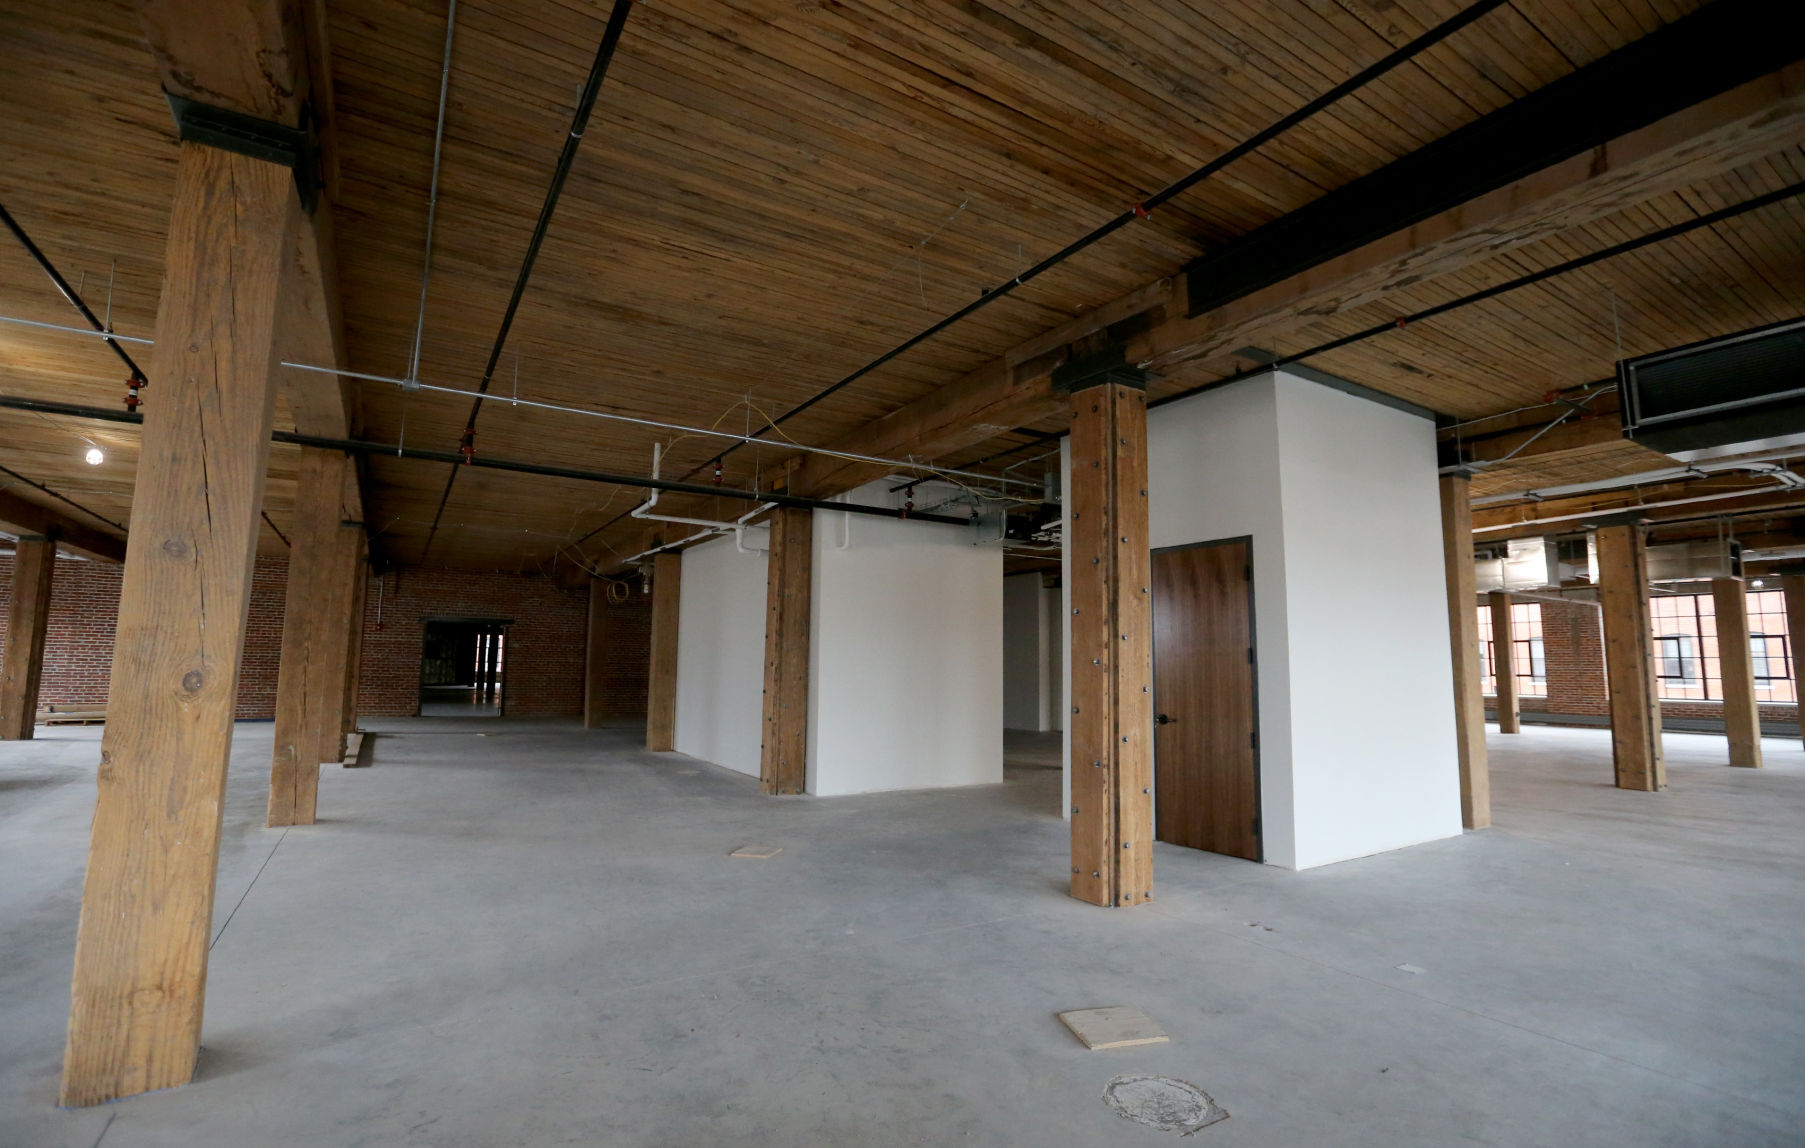 Steele Capital Management is relocating to a space in The Dupaco Voices Building in Dubuque.    PHOTO CREDIT: JESSICA REILLY